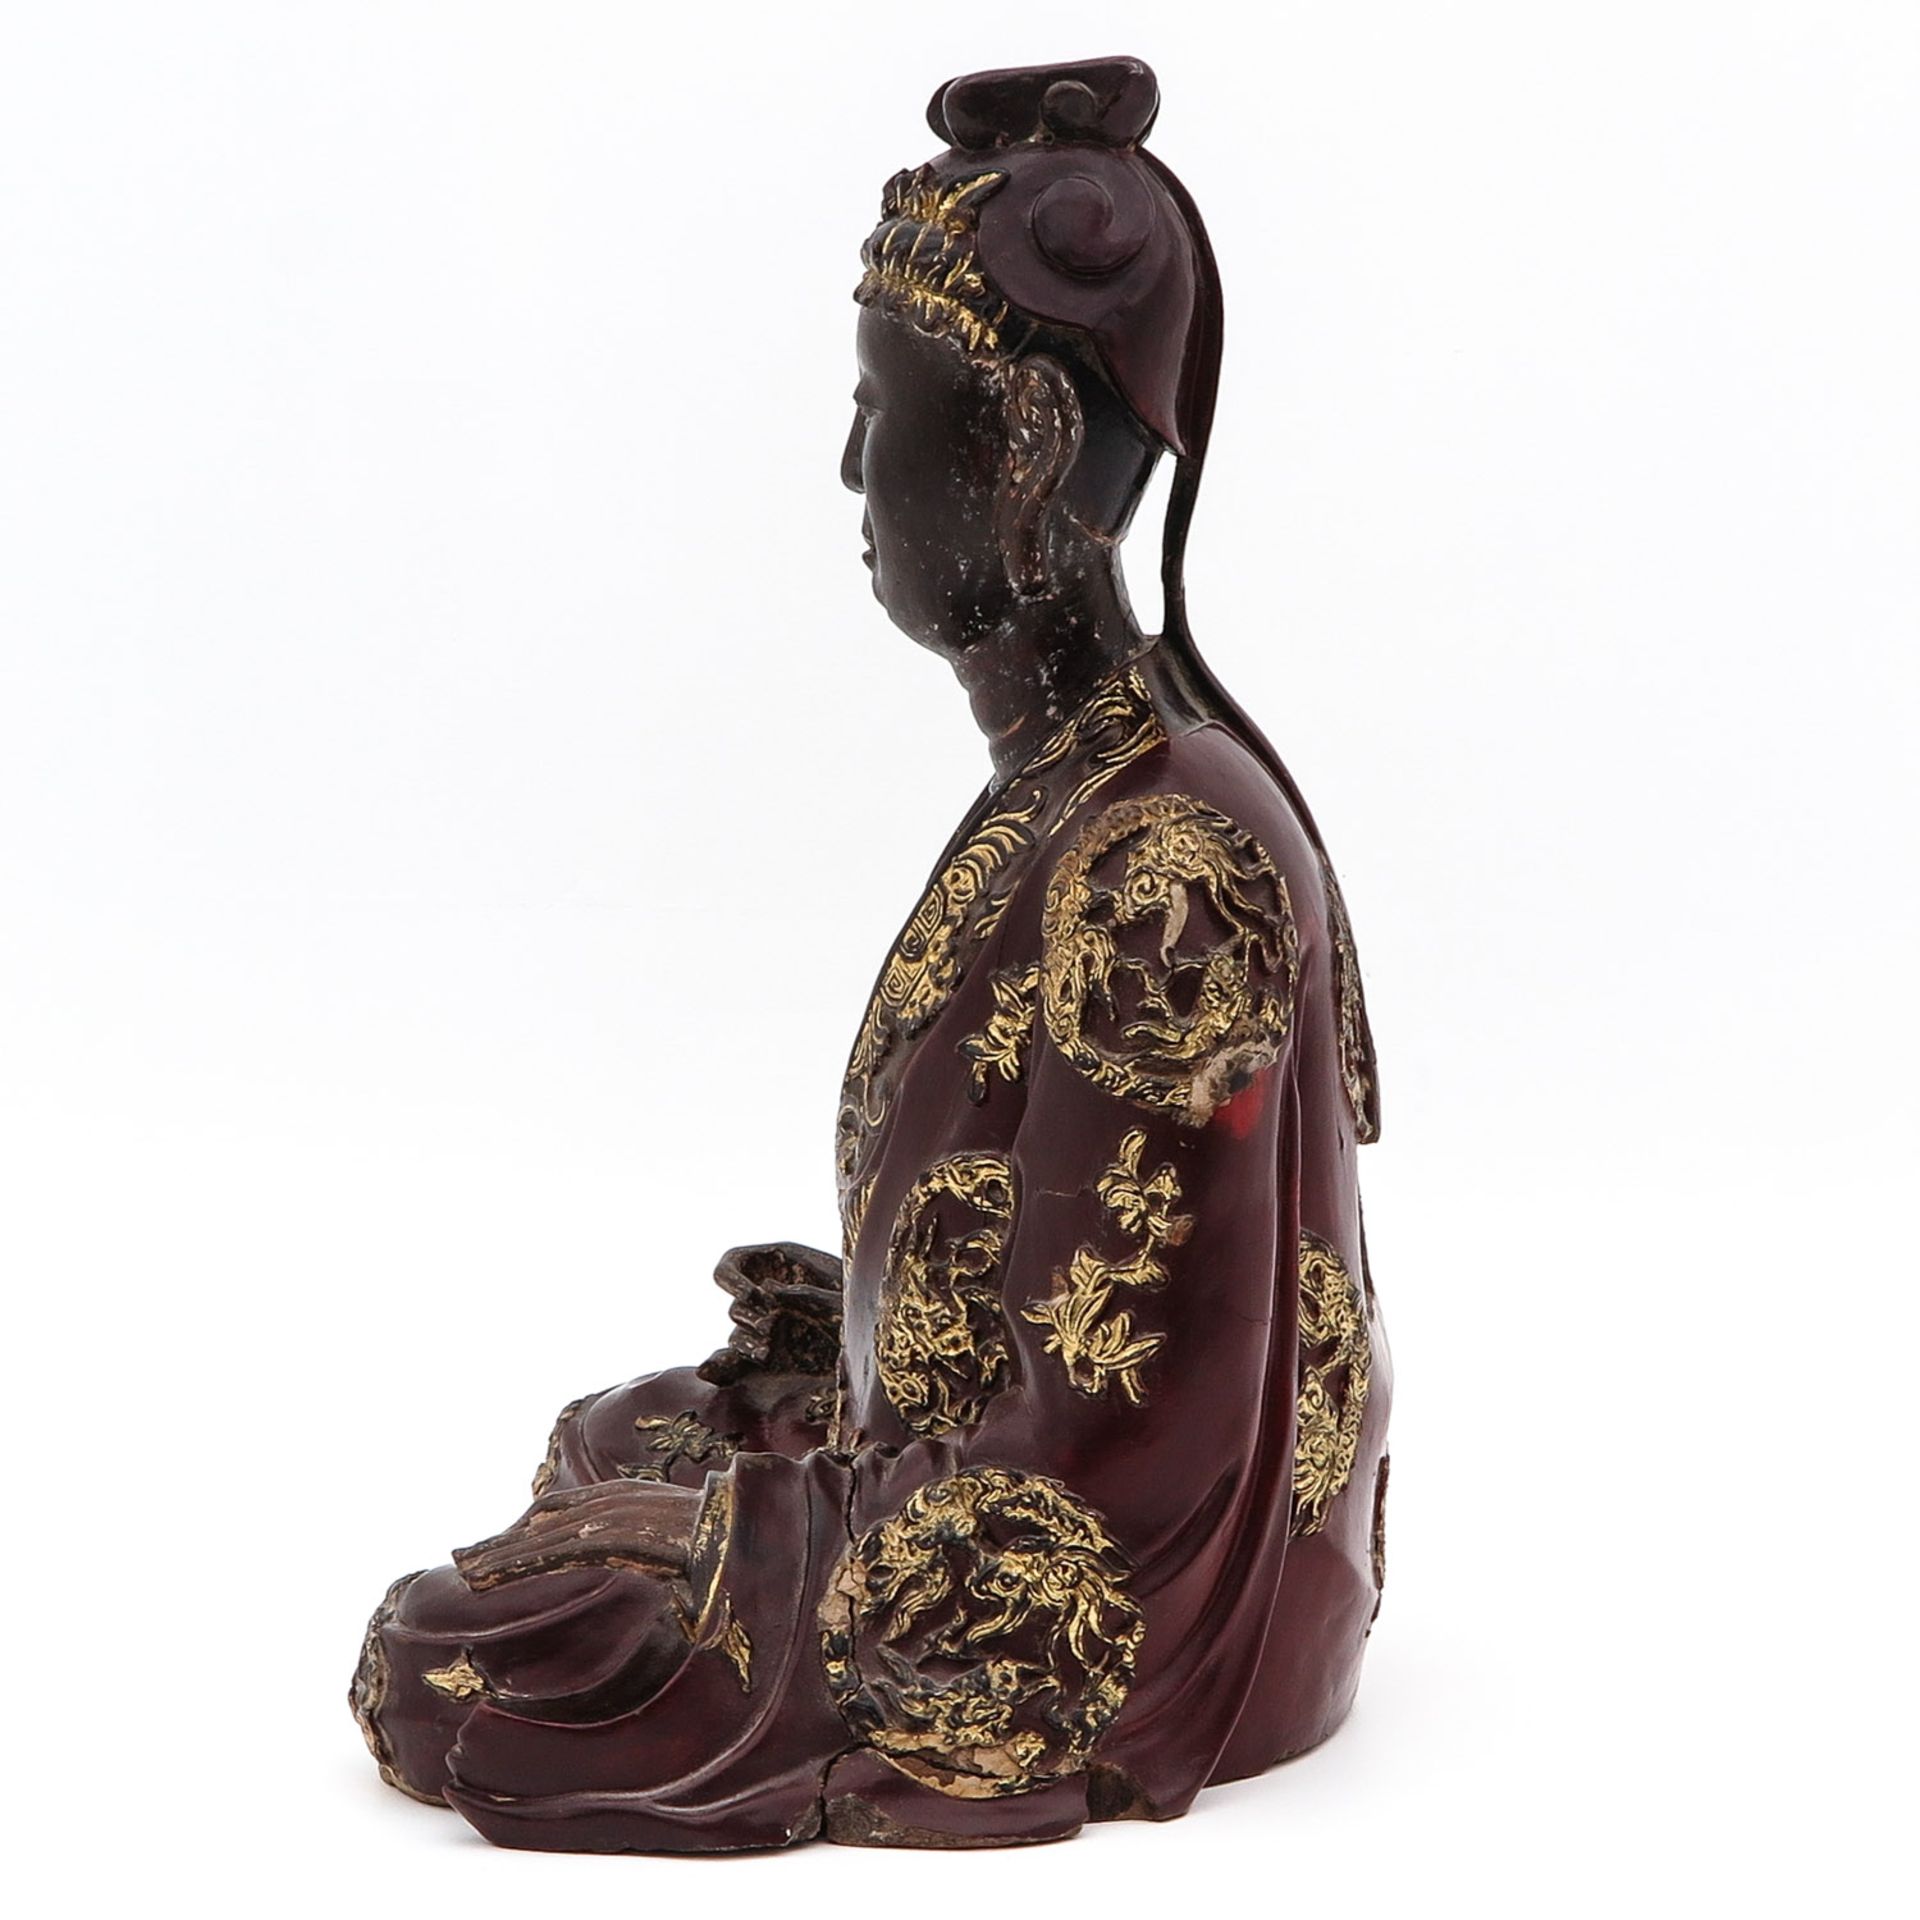 A Carved Wood Buddha - Image 2 of 10